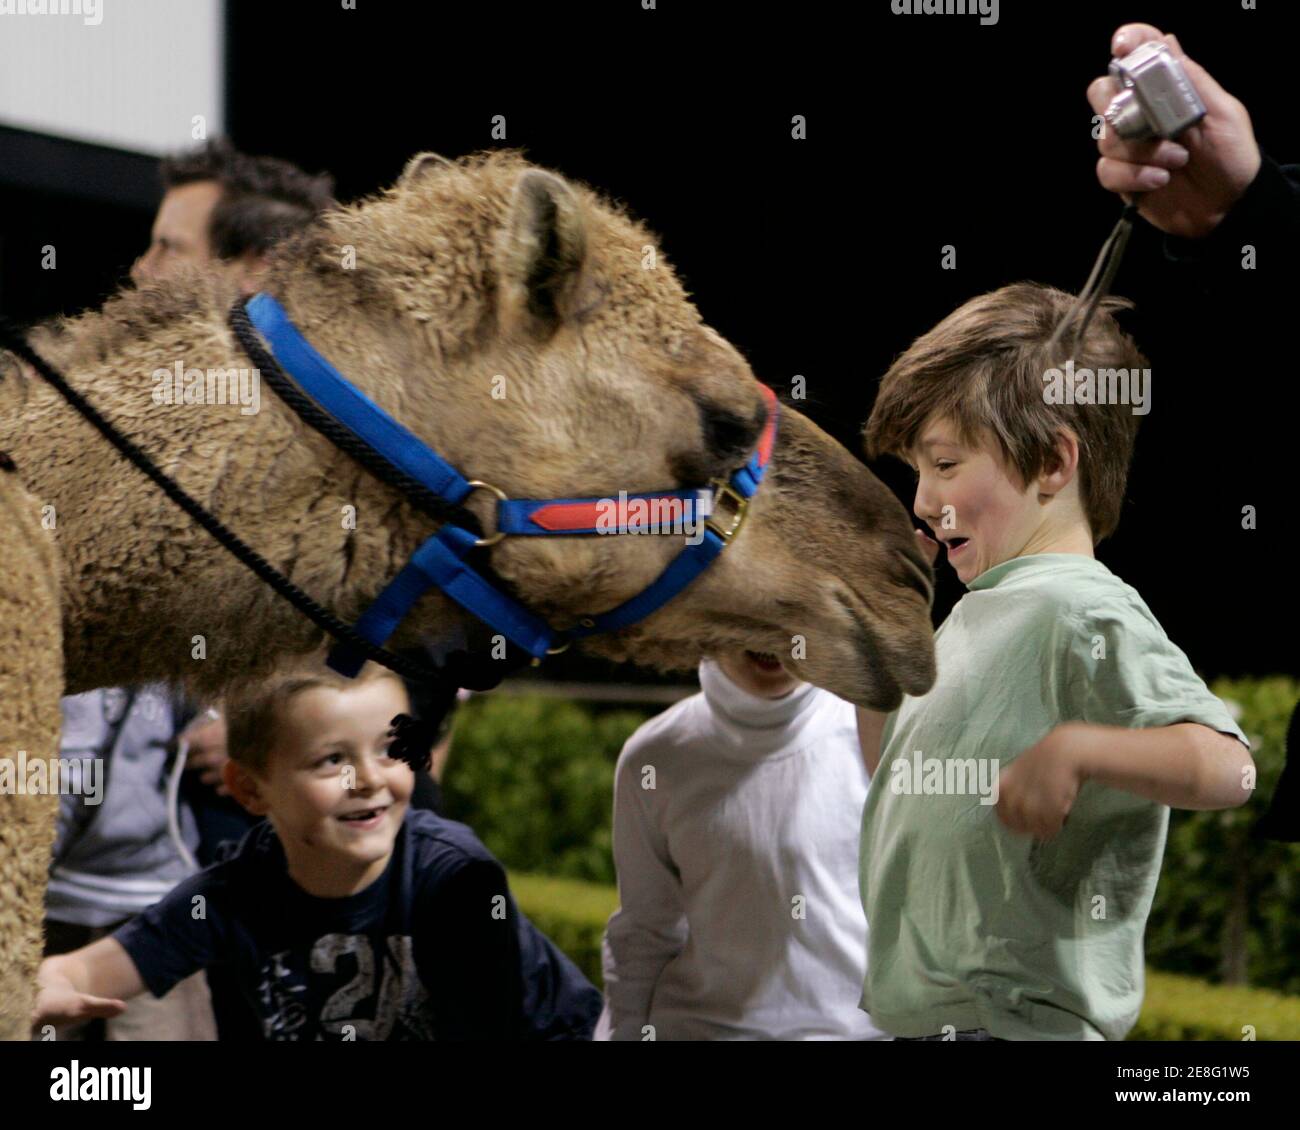 A boy reacts as a racing camel approaches him before a camel race at Harold Park Paceway in Sydney October 12, 2007. The races were held in a bid to alleviate the loss of millions of dollars in the horse racing industry due to an indefinite ban imposed by city officials because of Australia's first outbreak of equine flu in August.   REUTERS/Will Burgess    (AUSTRALIA) Stock Photo